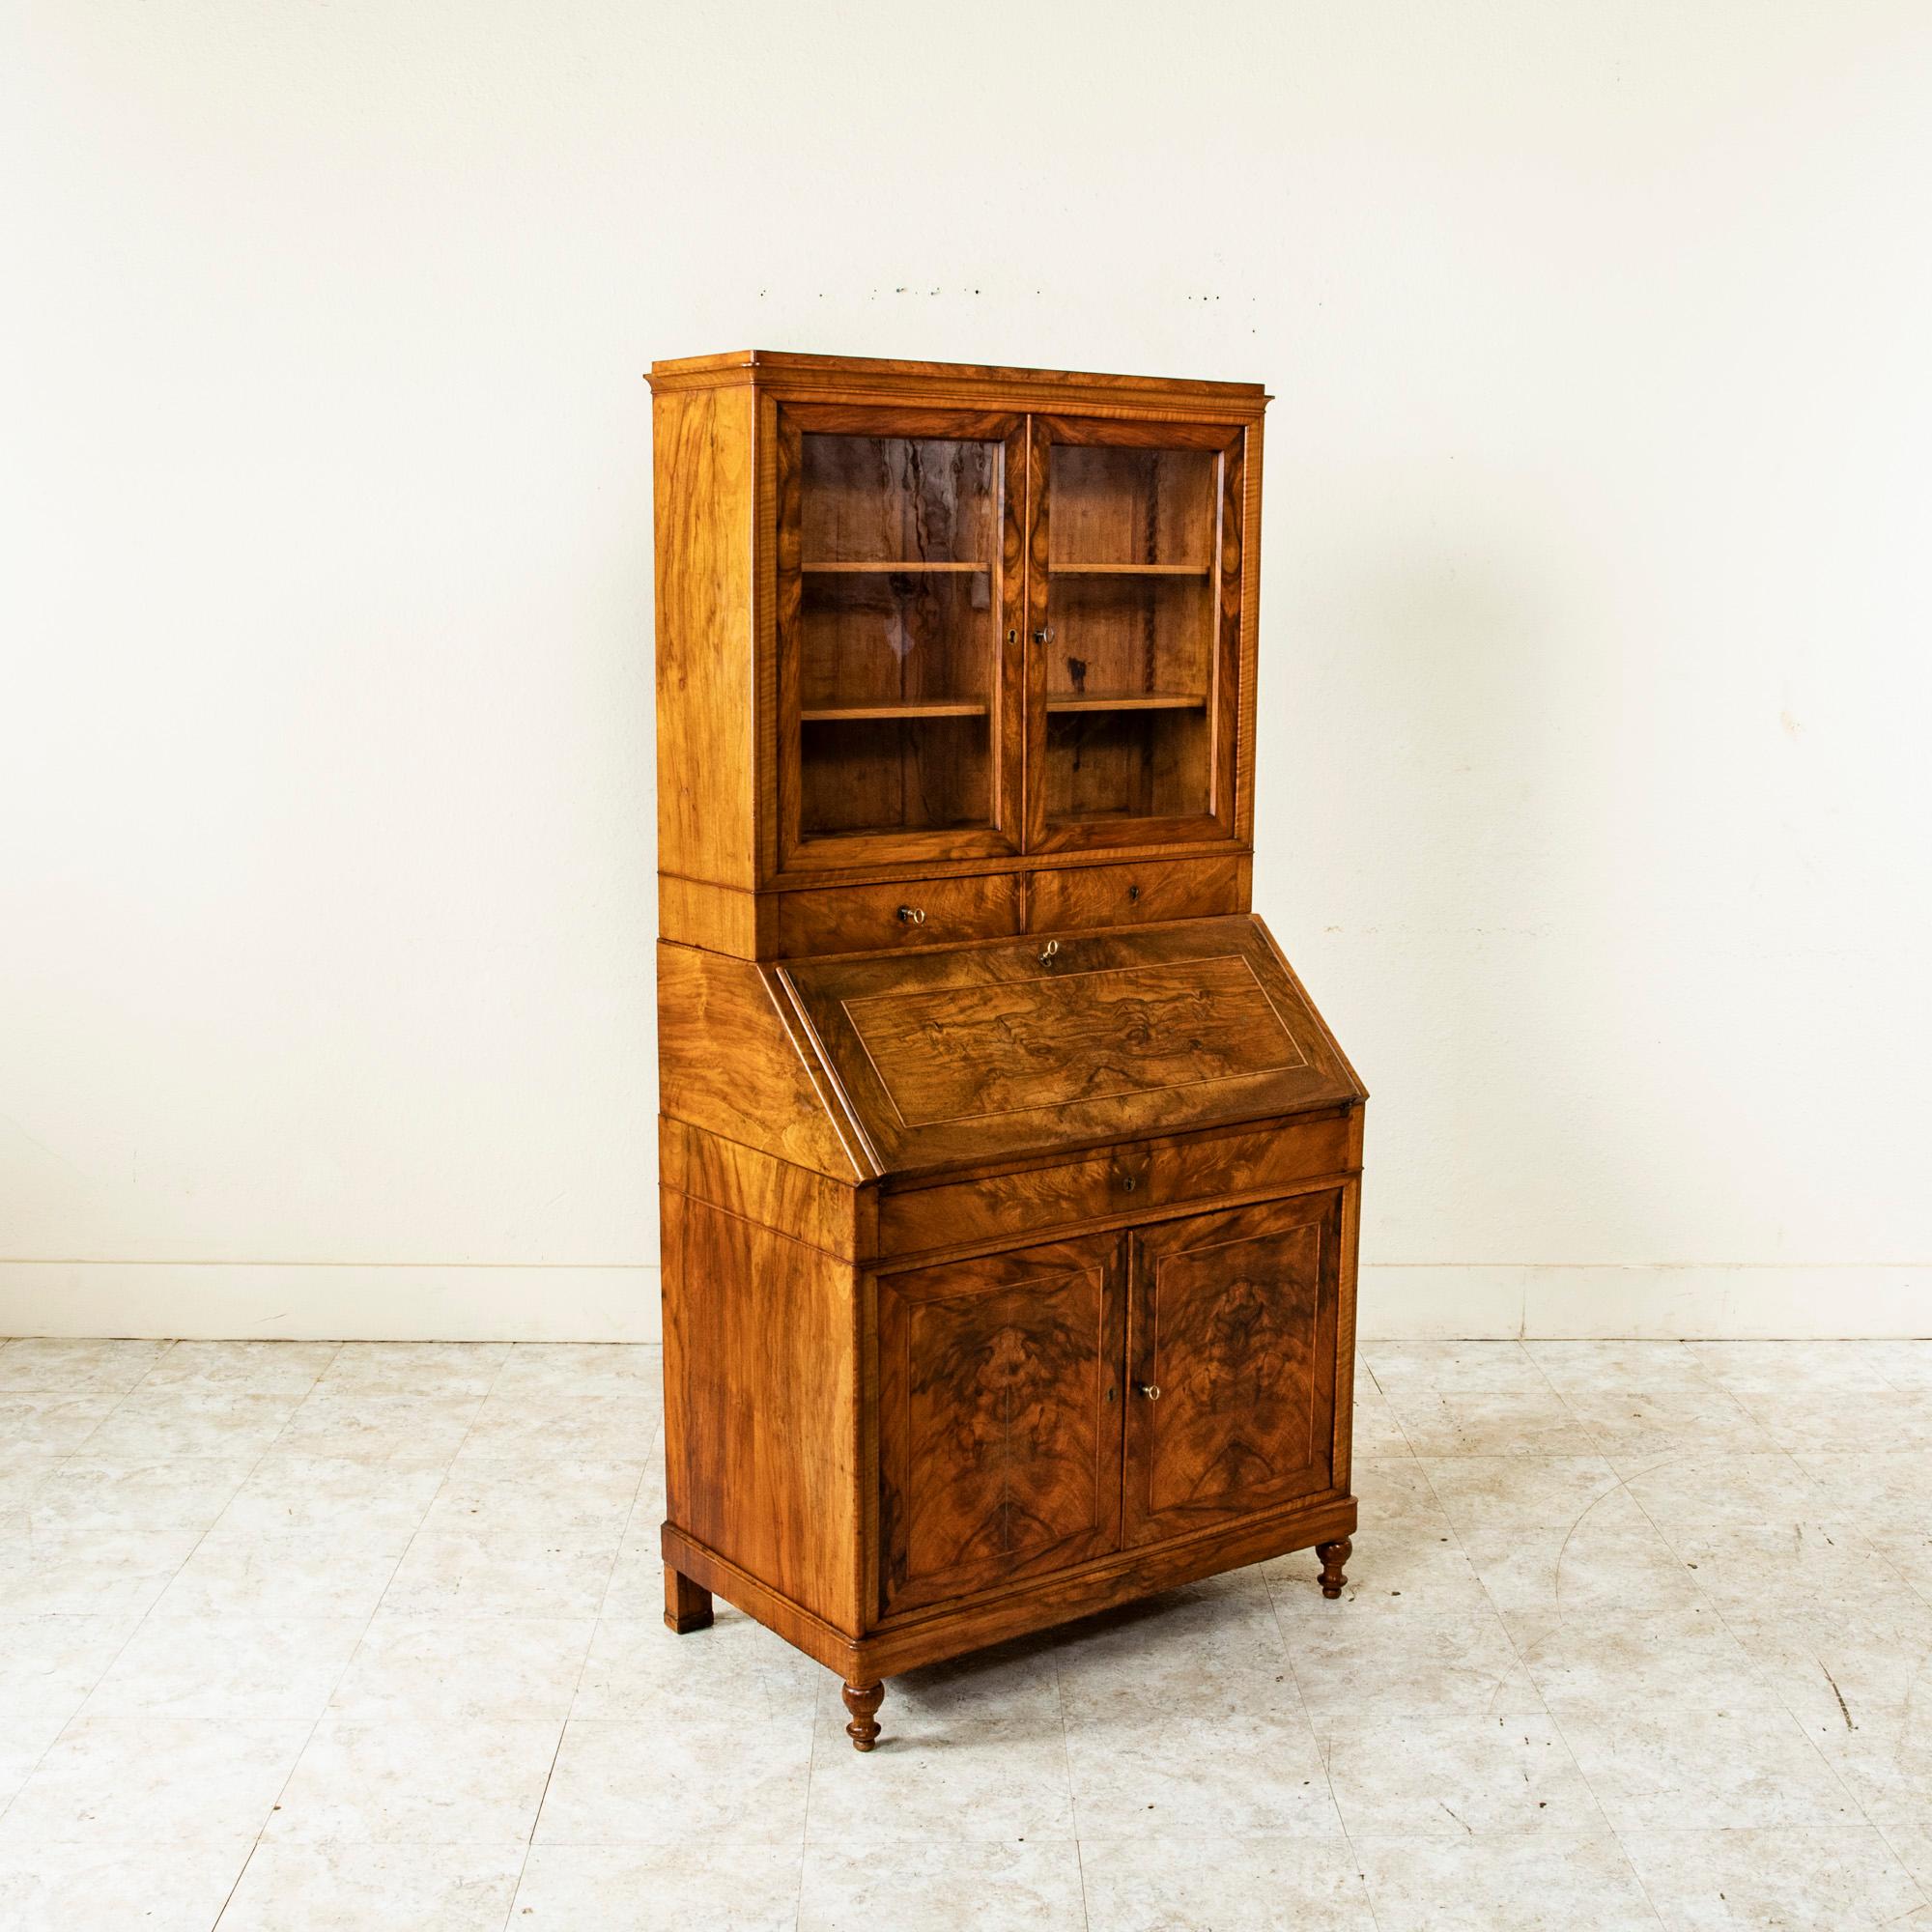 This nineteenth century French Louis Philippe period secretary is constructed of book matched burl walnut. The piece features a drop front gold tooled green leather writing surface with four interior drawers. The upper display cabinet has two doors